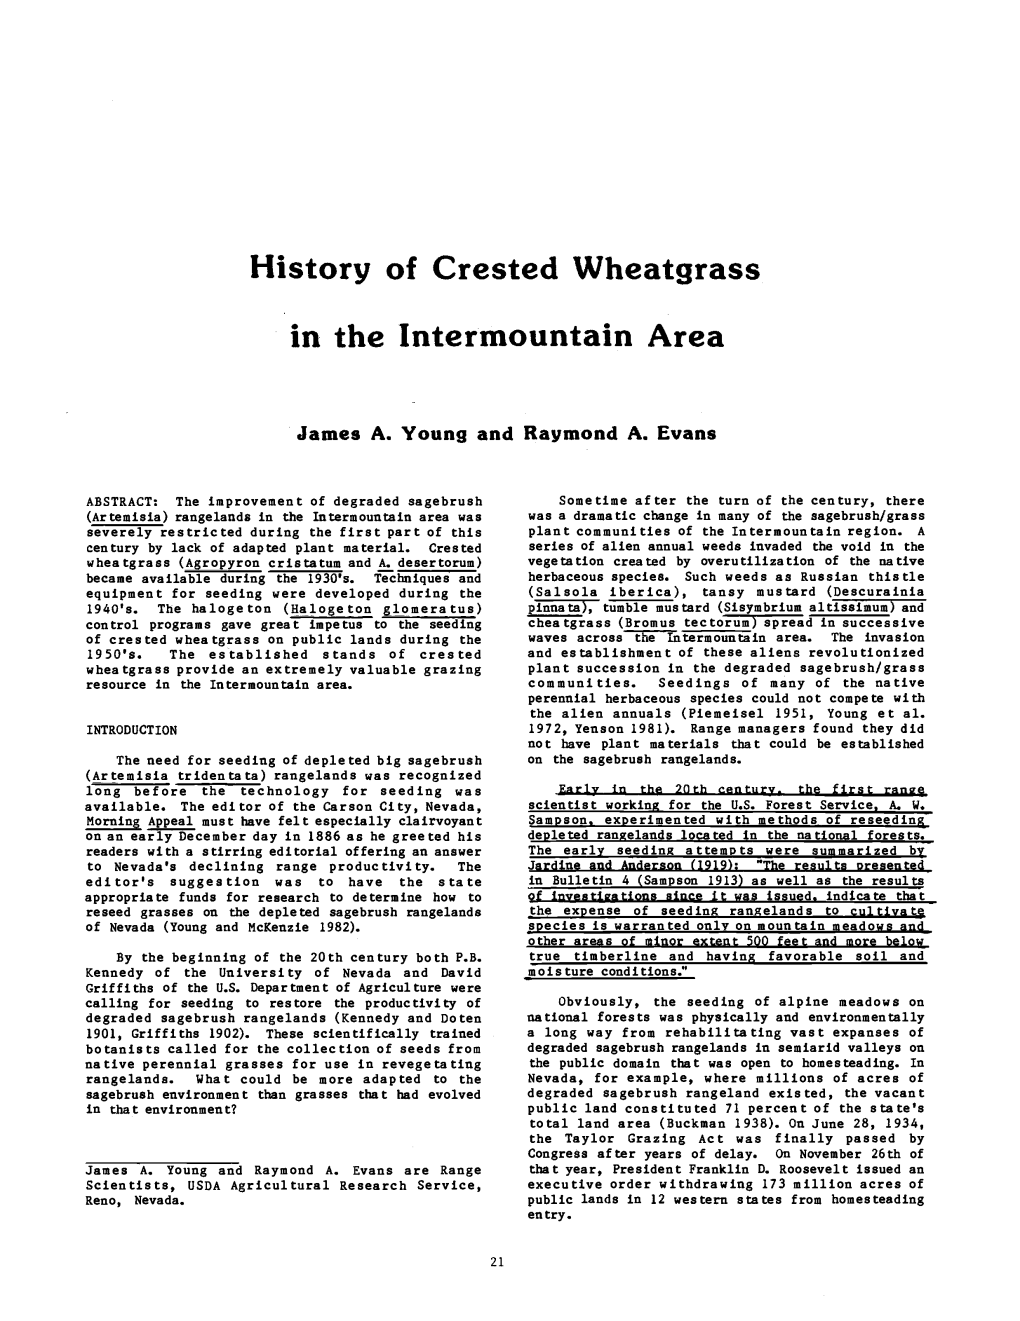 History of Crested Wheatgrass in the Intermountain Area